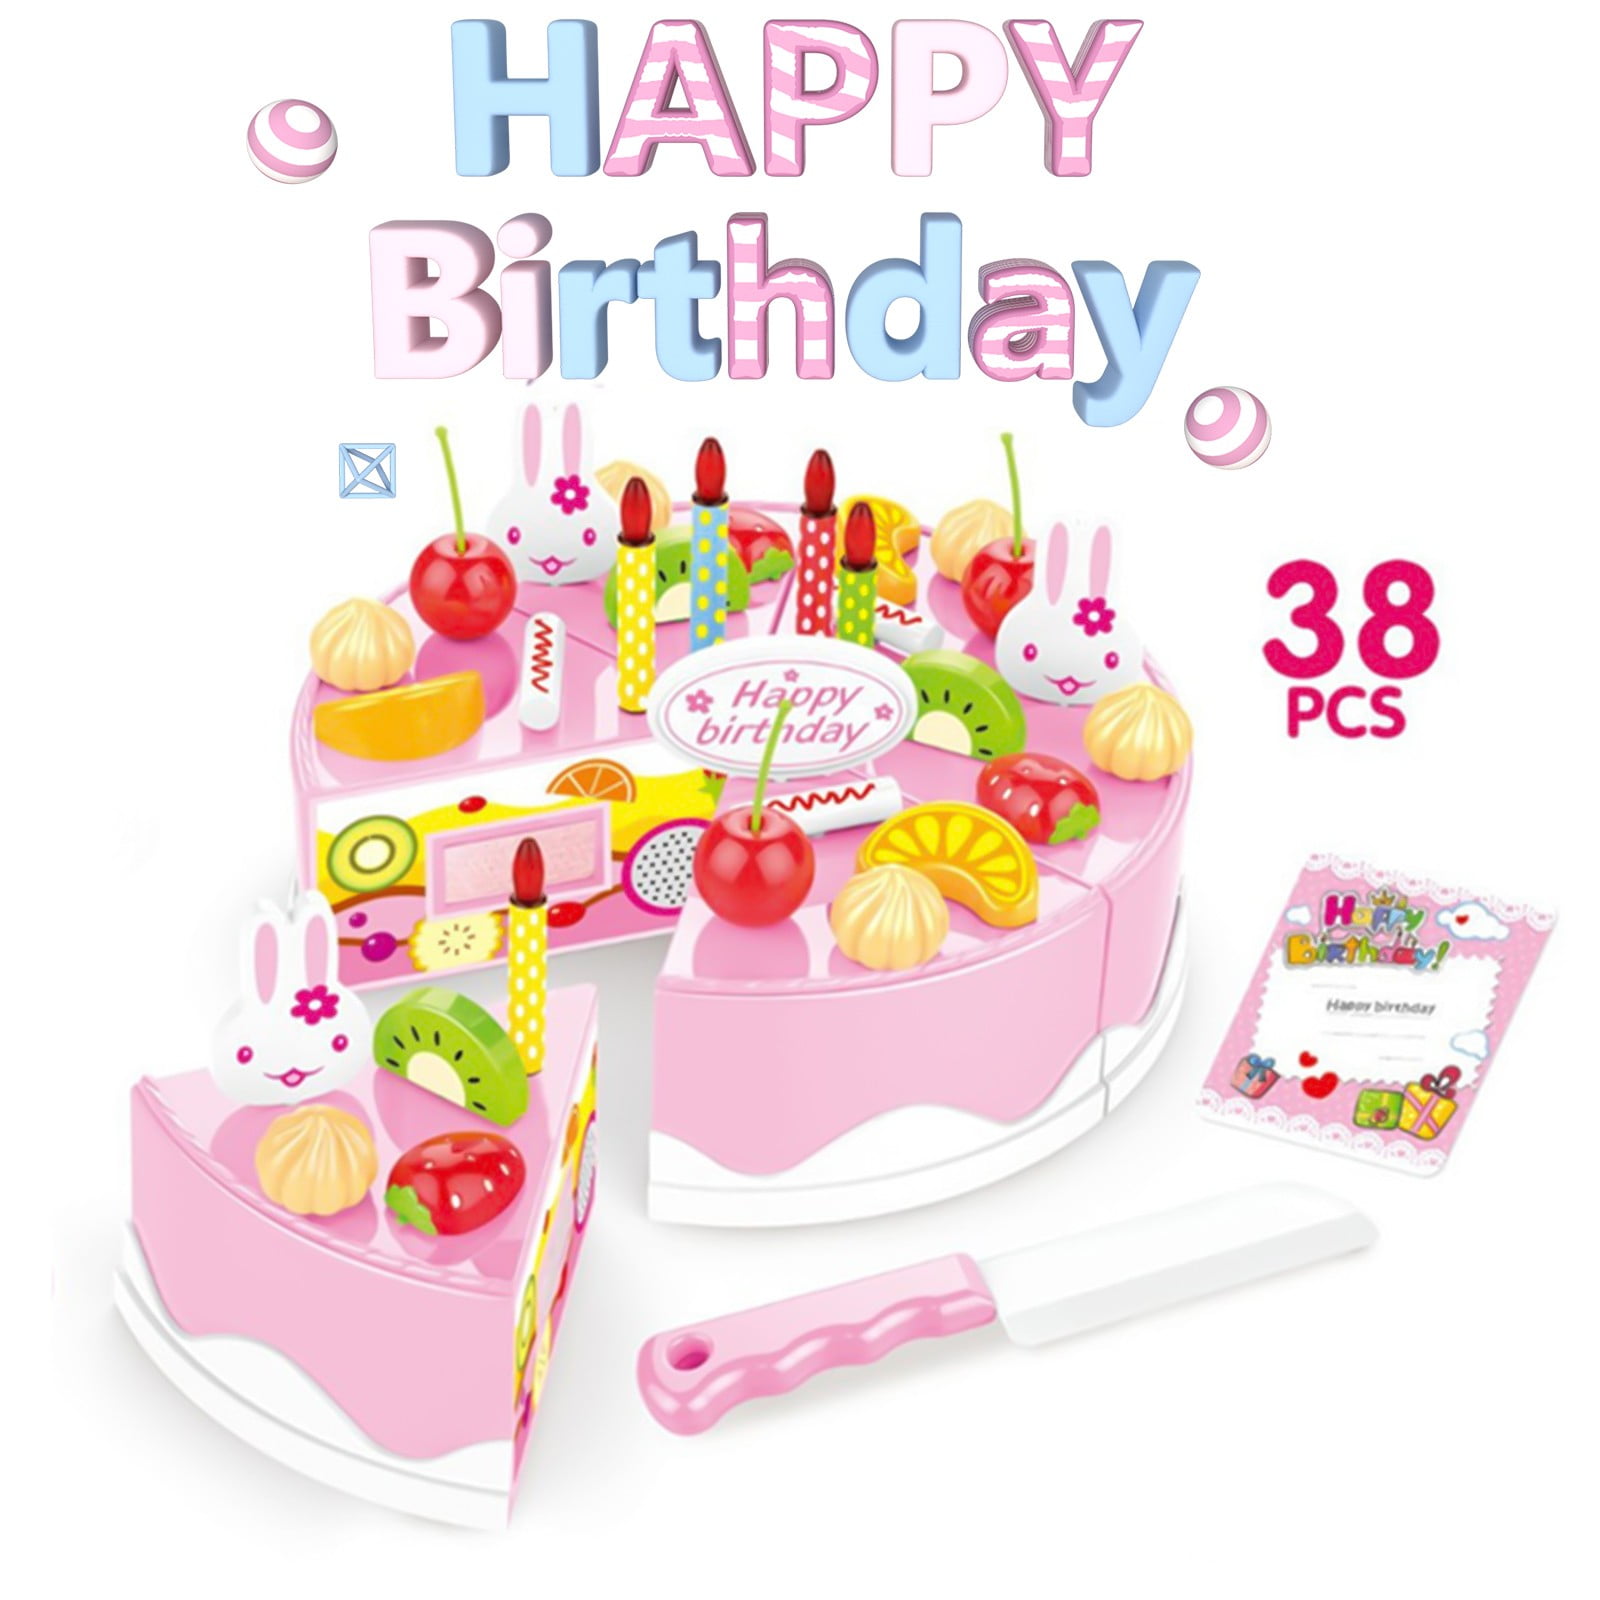 Happy birthday cake card for 6 six year party Vector Image